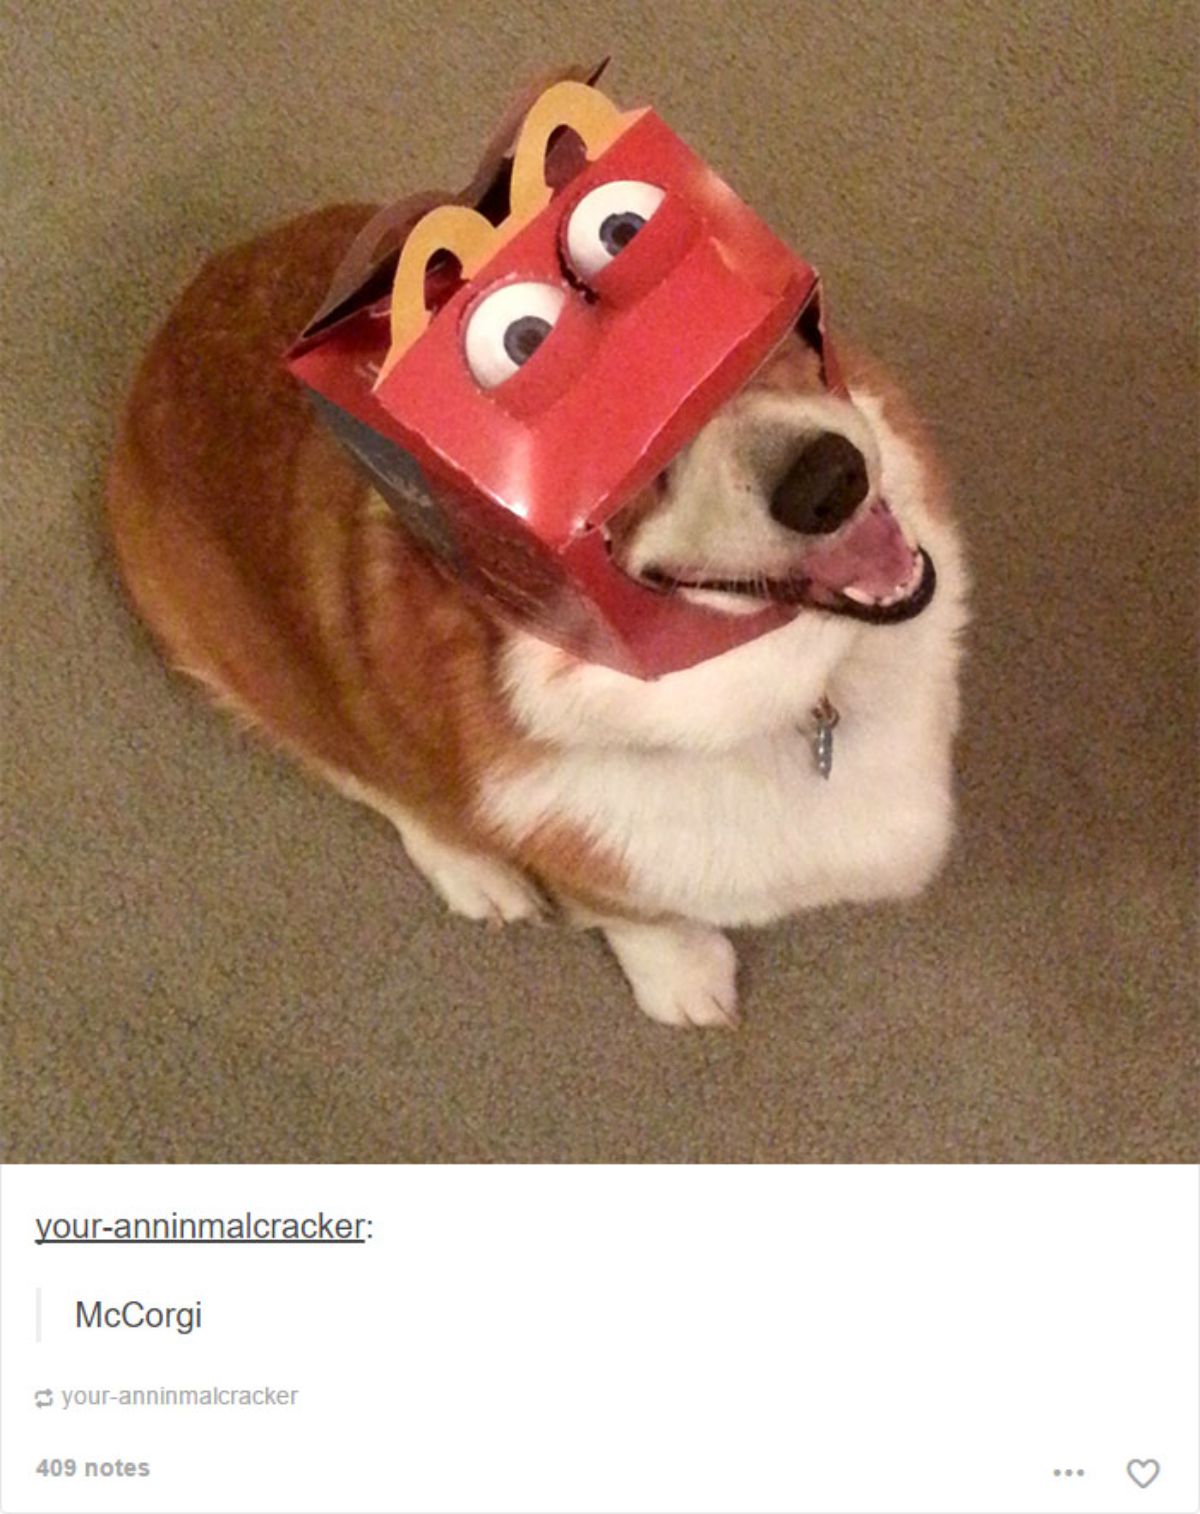 brown and white corgi sitting on the floor with a red white and yellow McDonald's pack on its head that has eyeballs